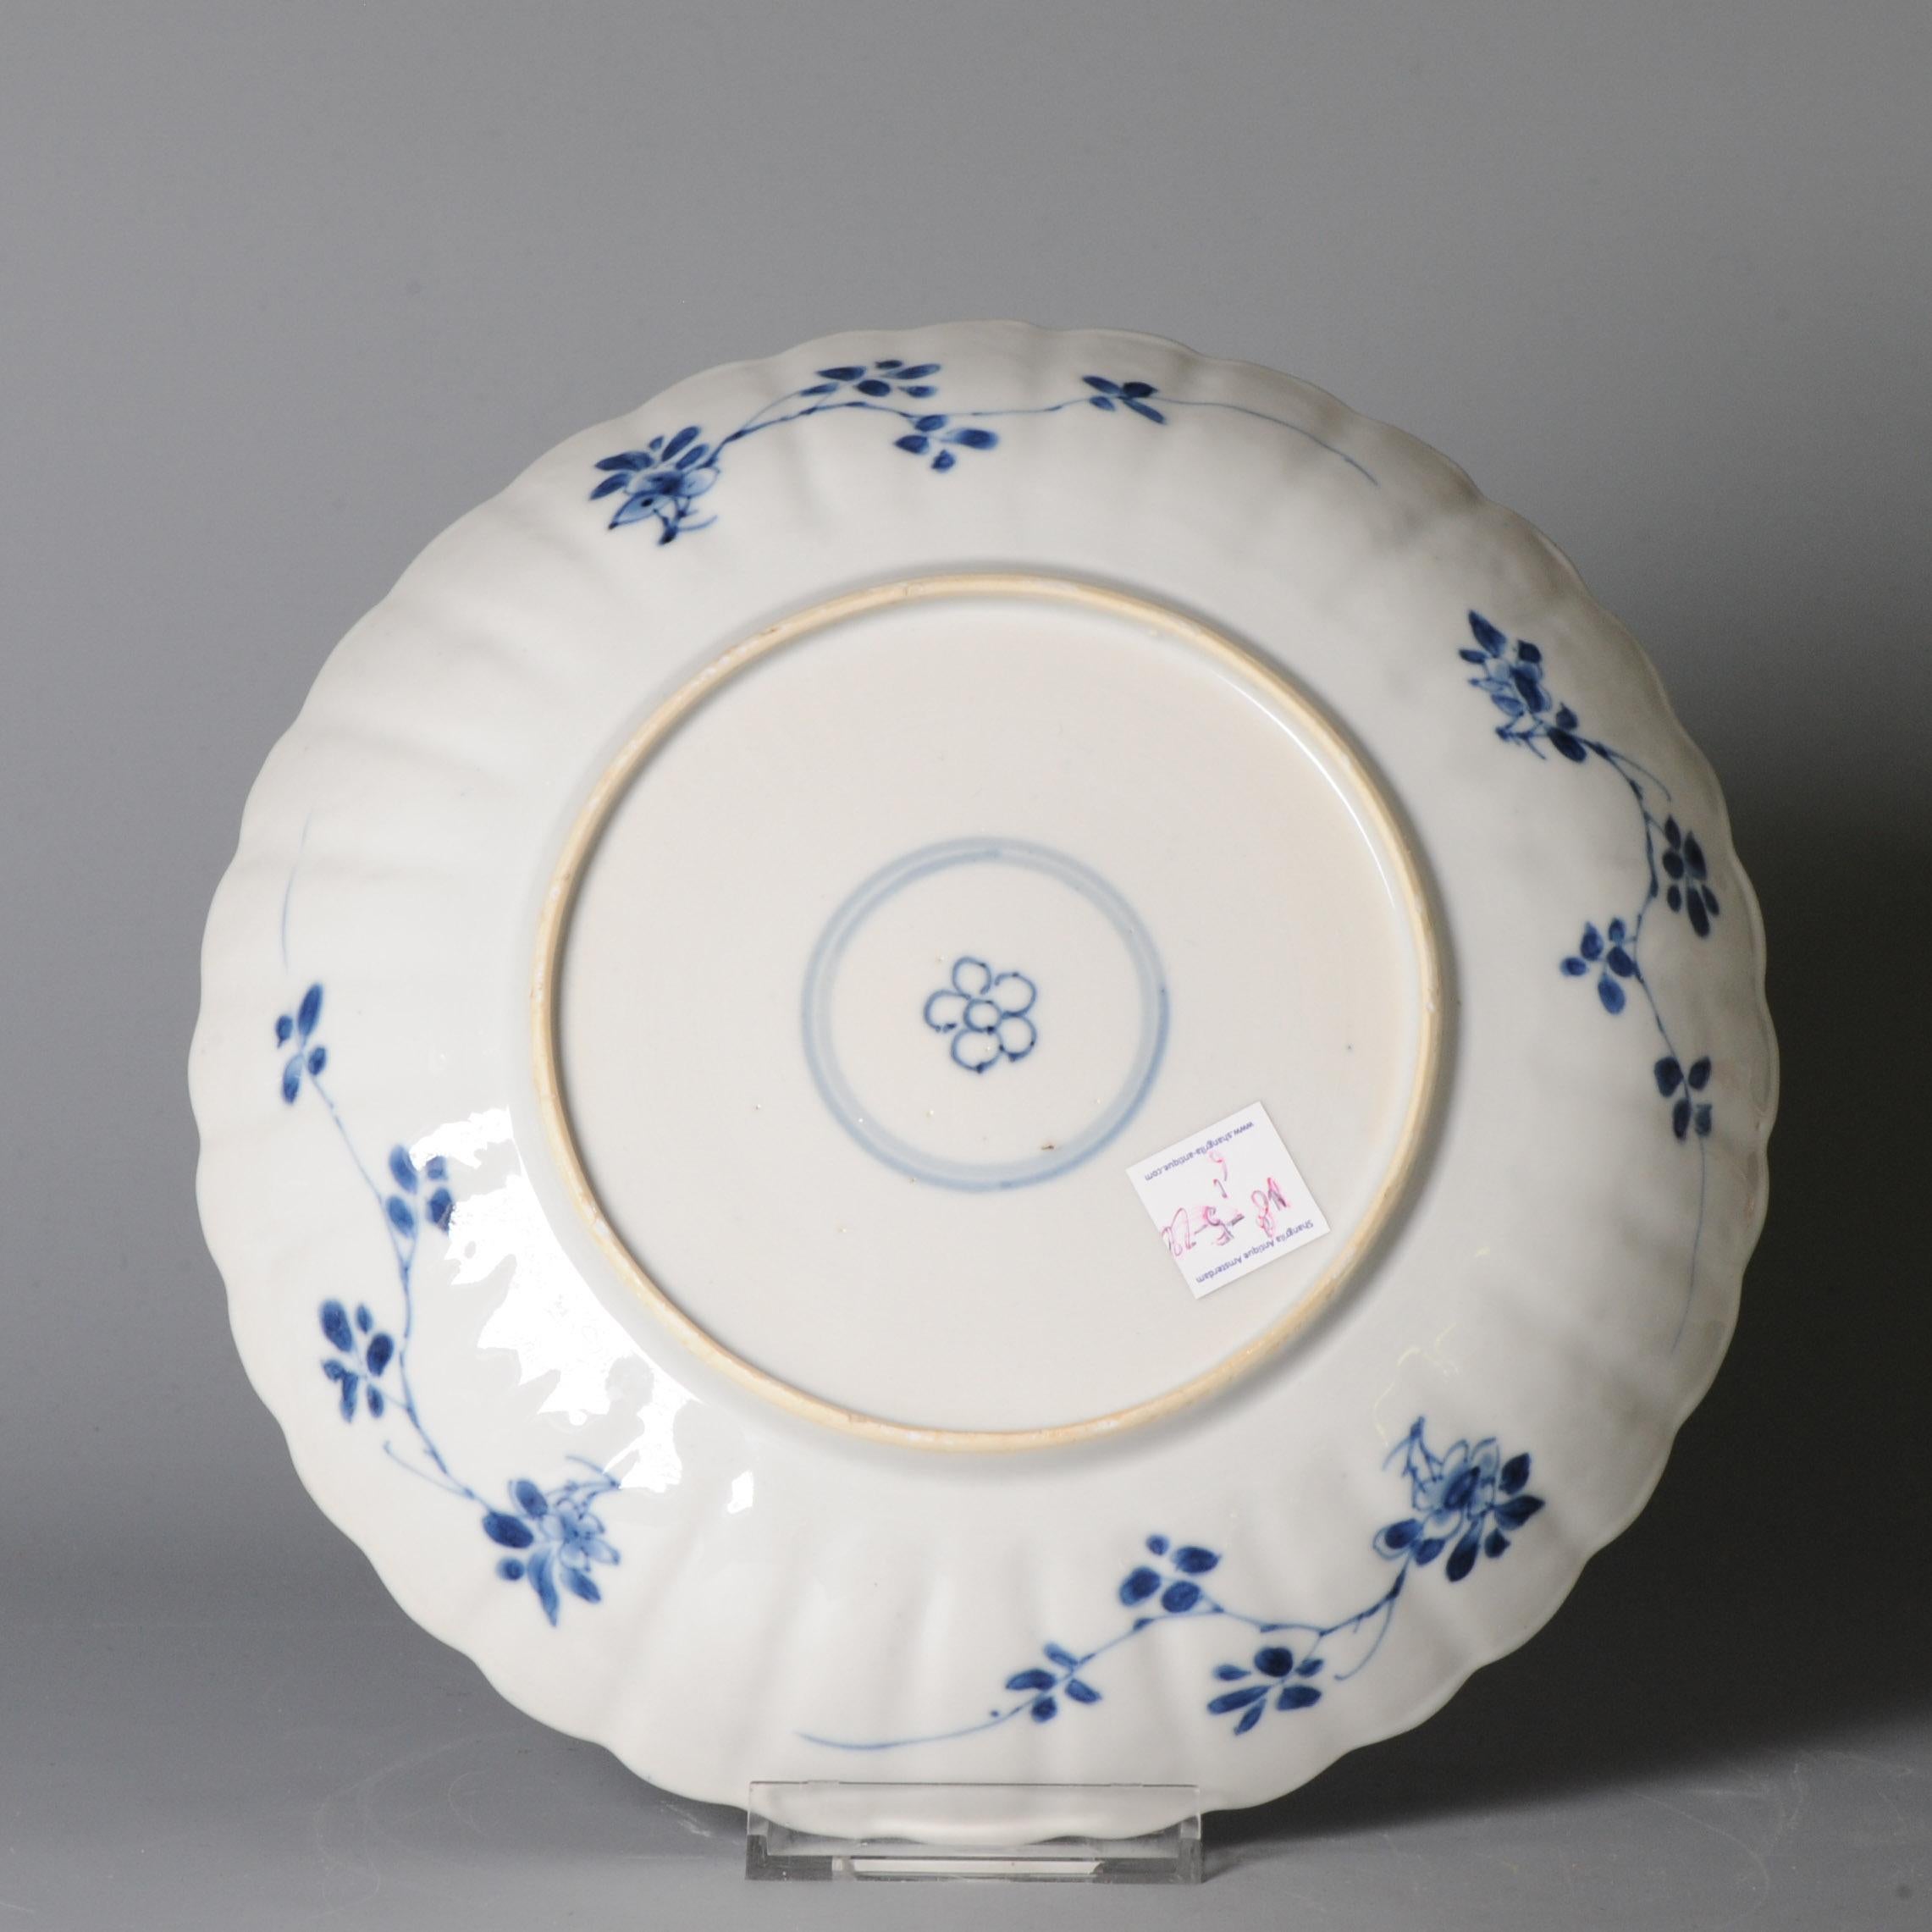 Porcelain A Rare Kangxi porcelain Blue and White Plates with Bird and floral decoration